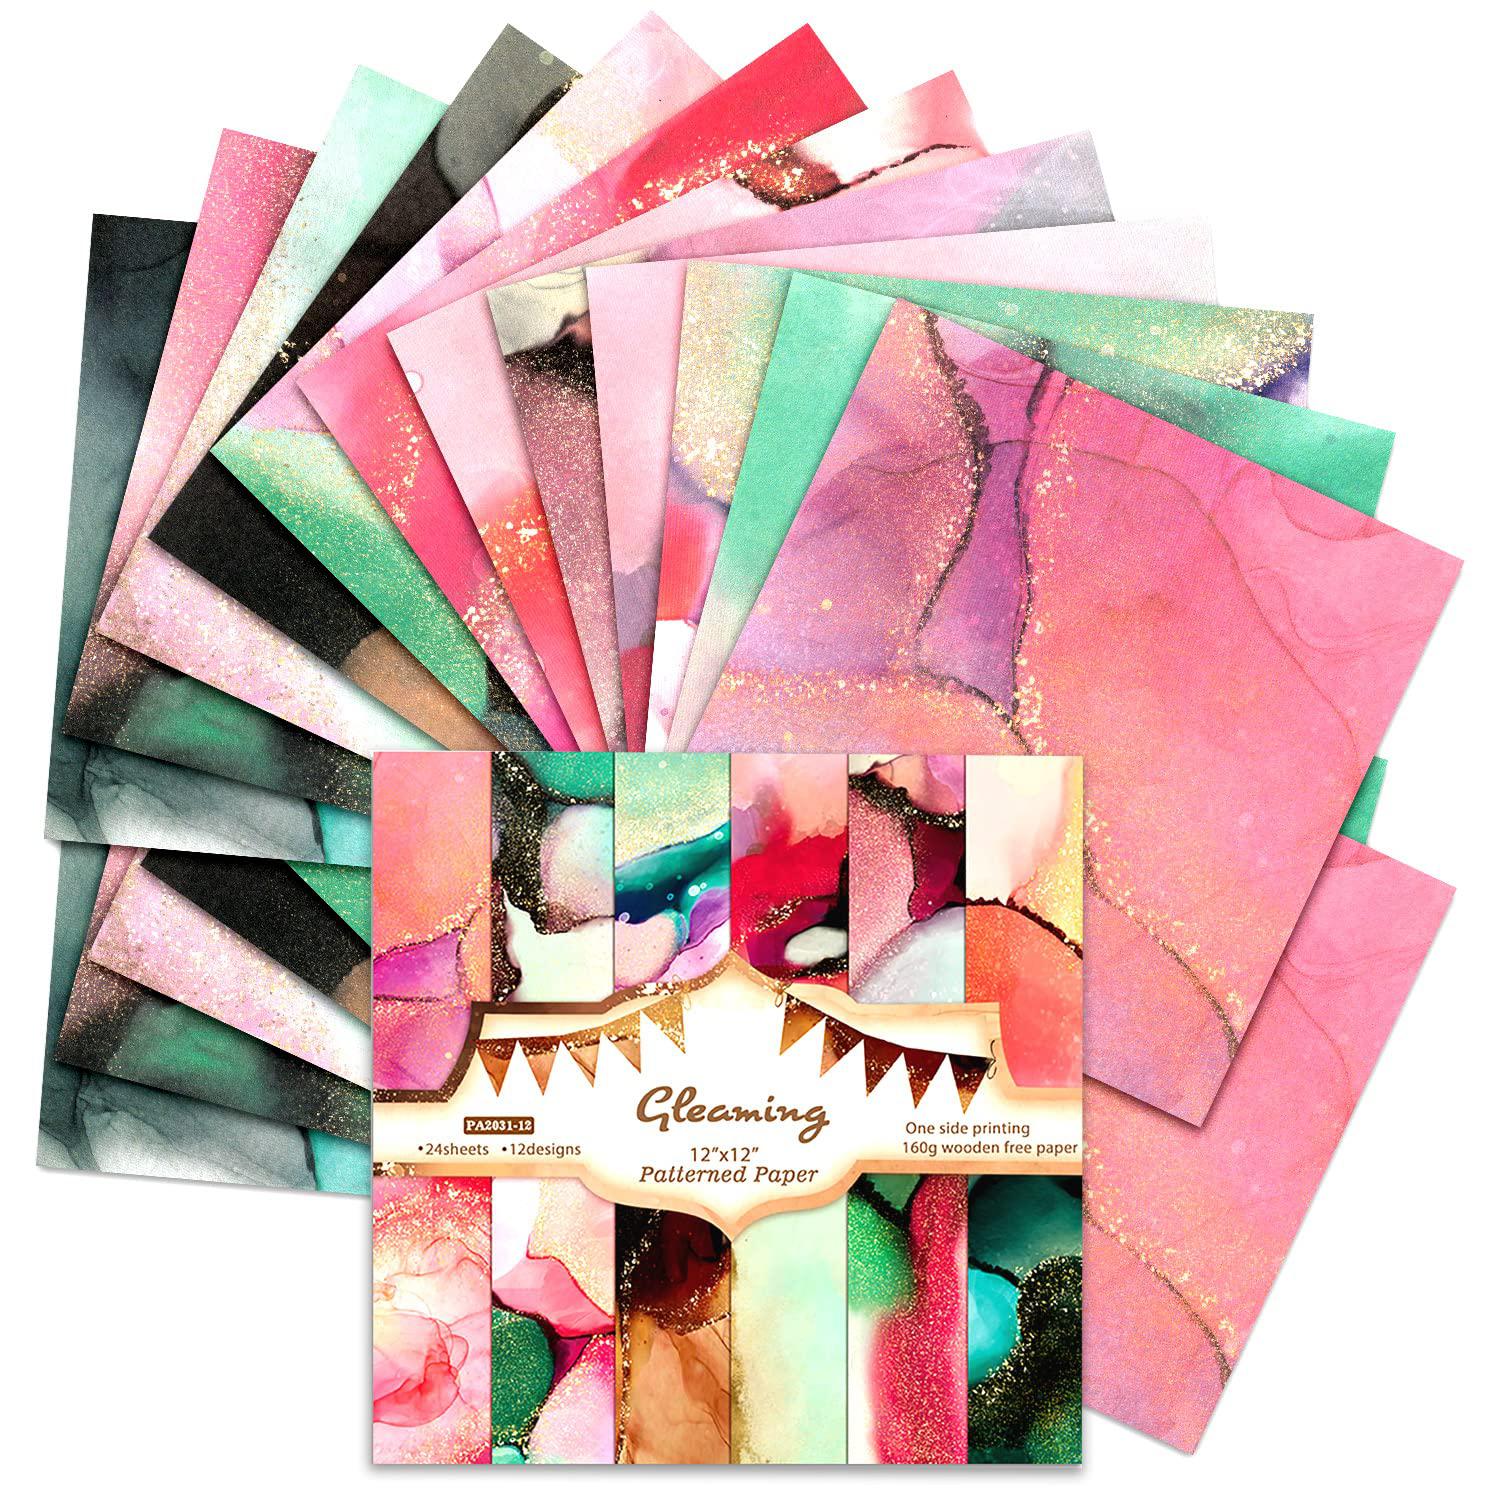 BLEDS scrapbook paper, 24 sheets craft scrapbooking paper pad 12x12 inch watercolored paper single-side printing junk journal cards